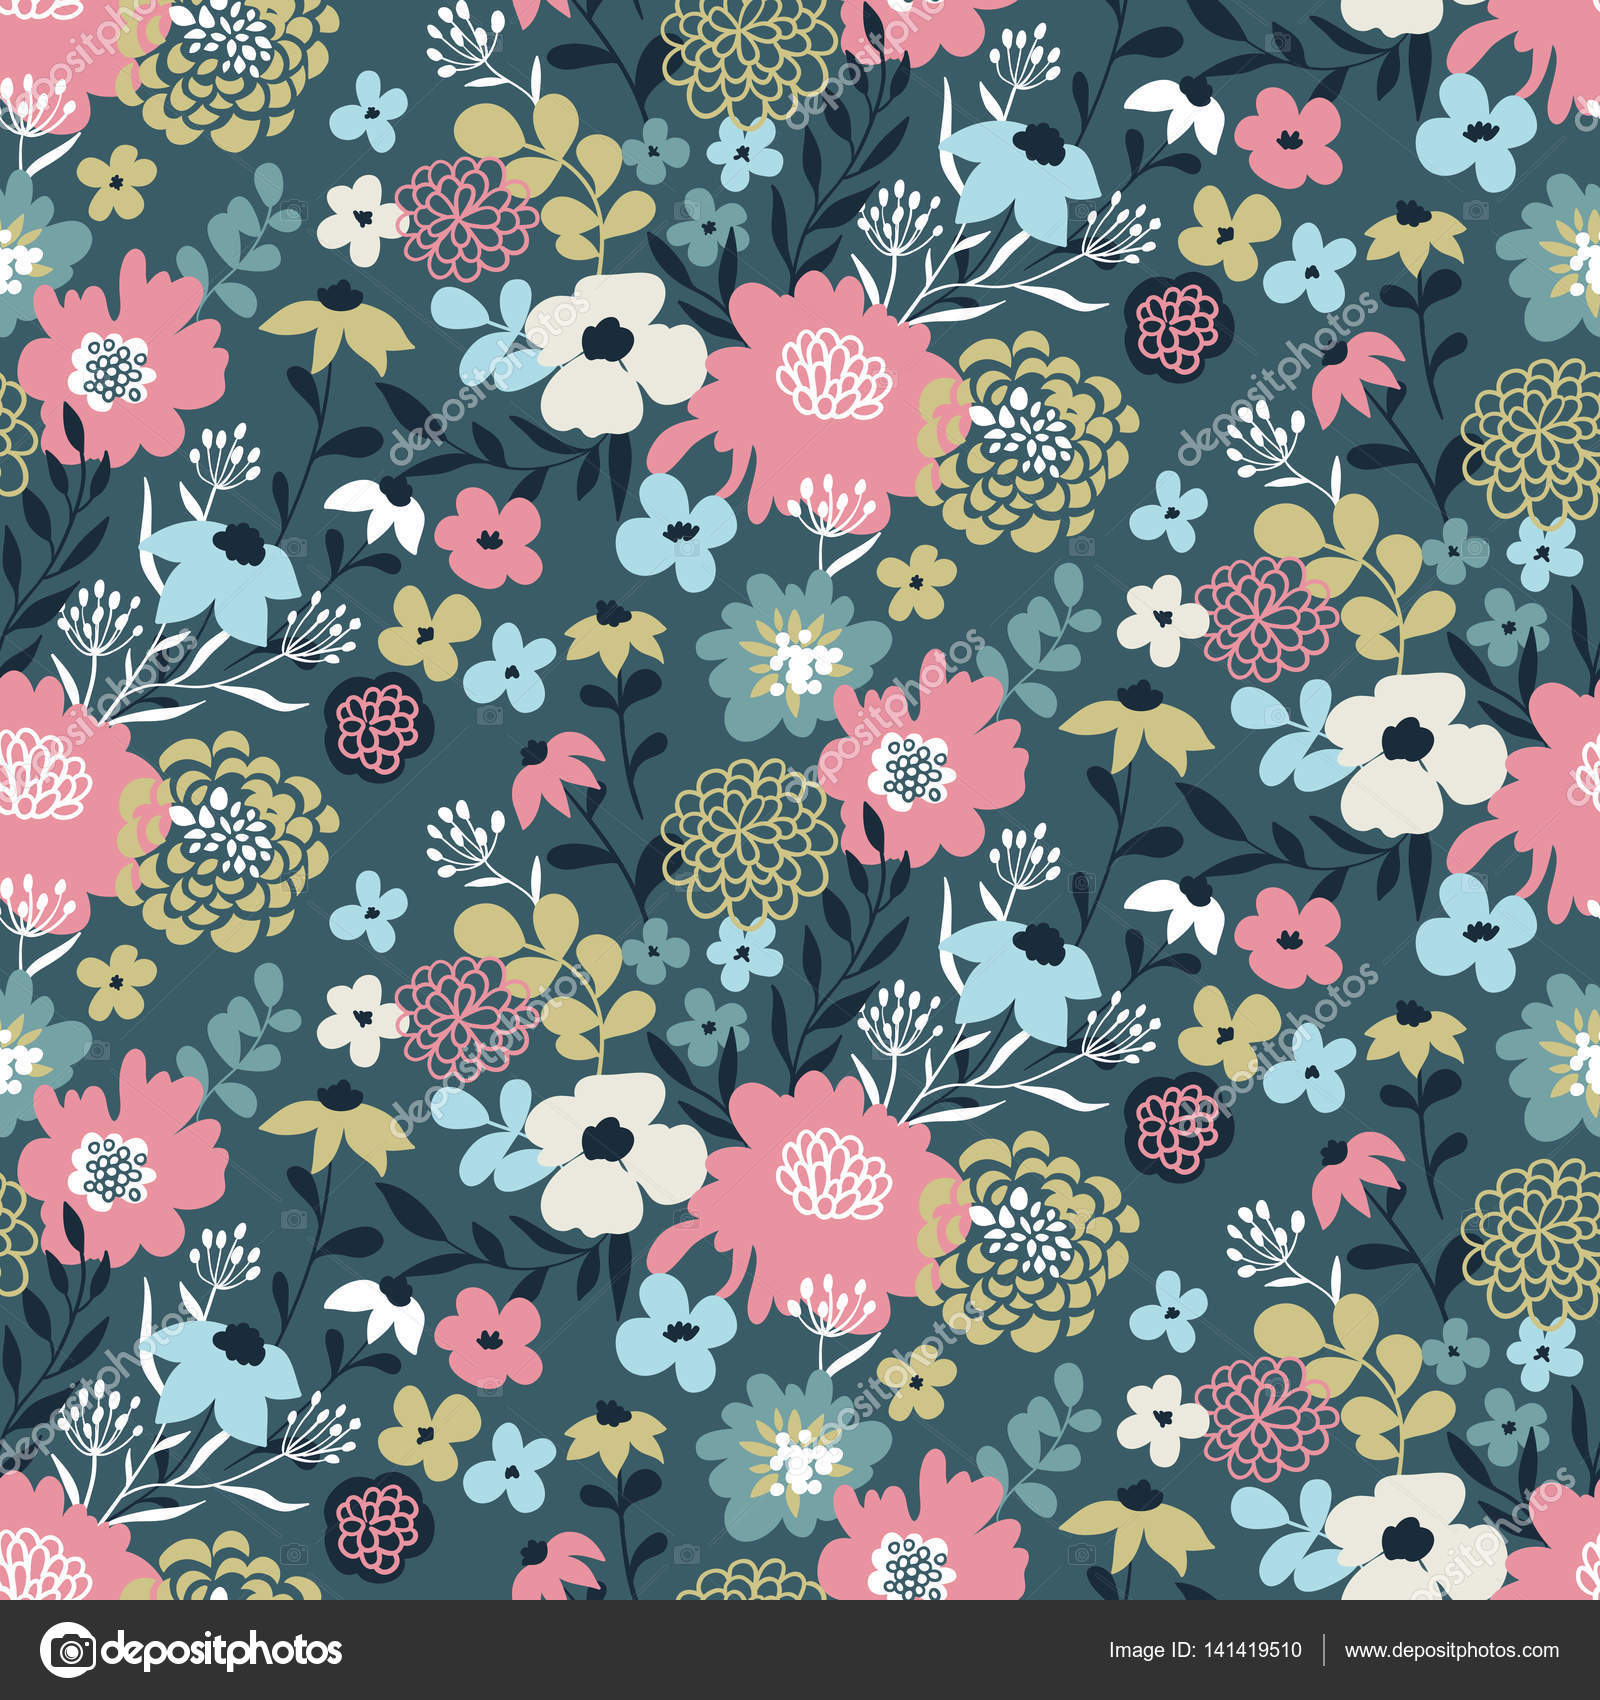 Trendy Seamless Floral Pattern Fabric Design With Simple Flowers